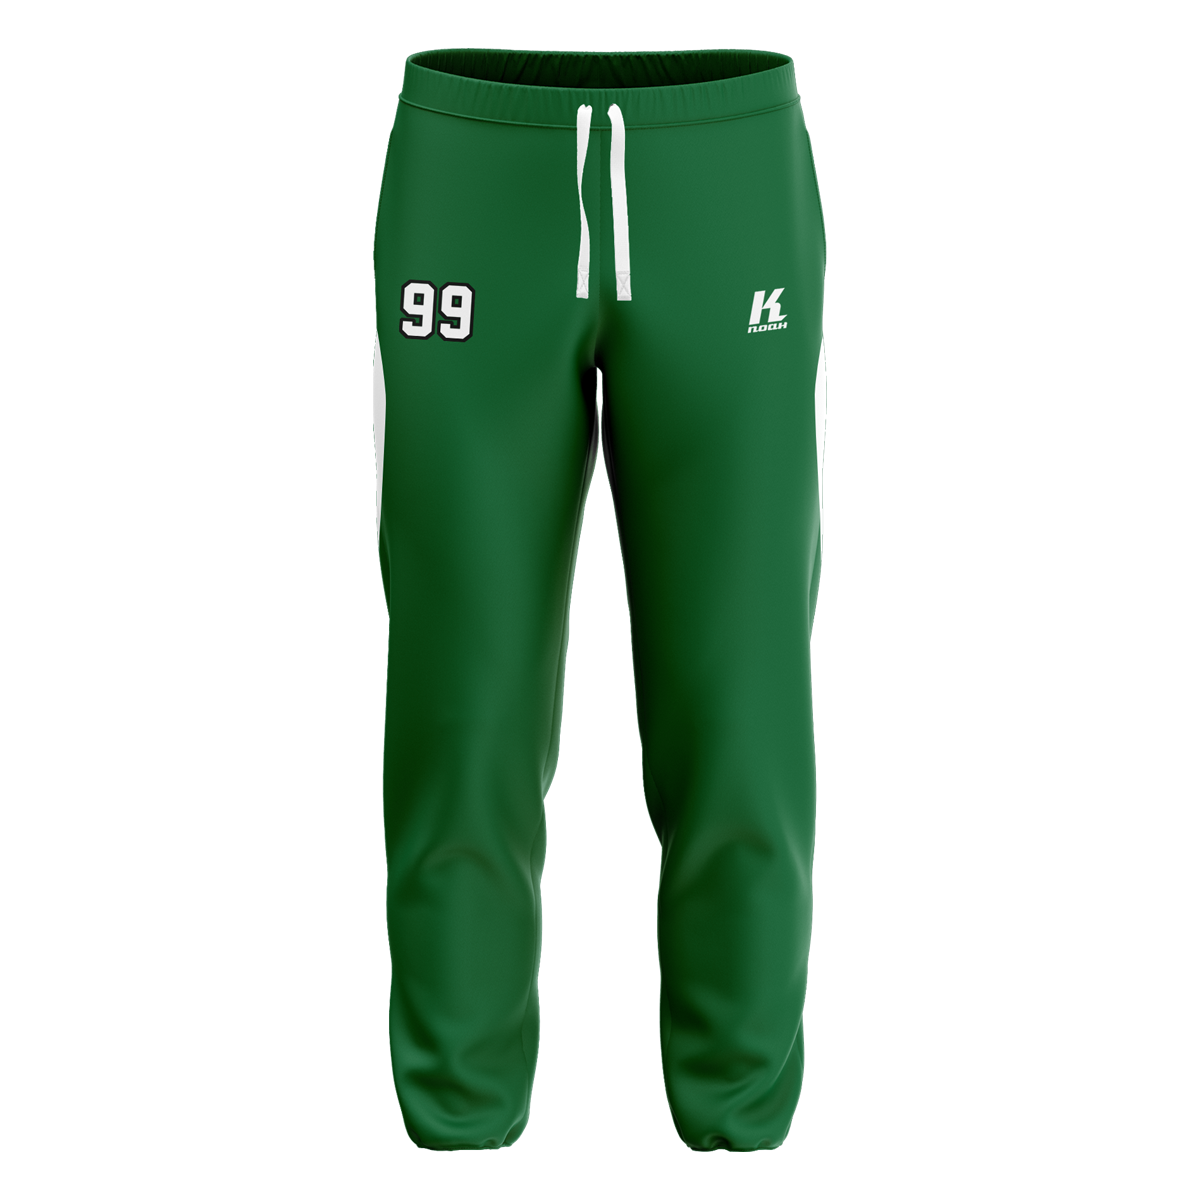 Giants Signature Series Sweat Pant with Playernumber/Initials